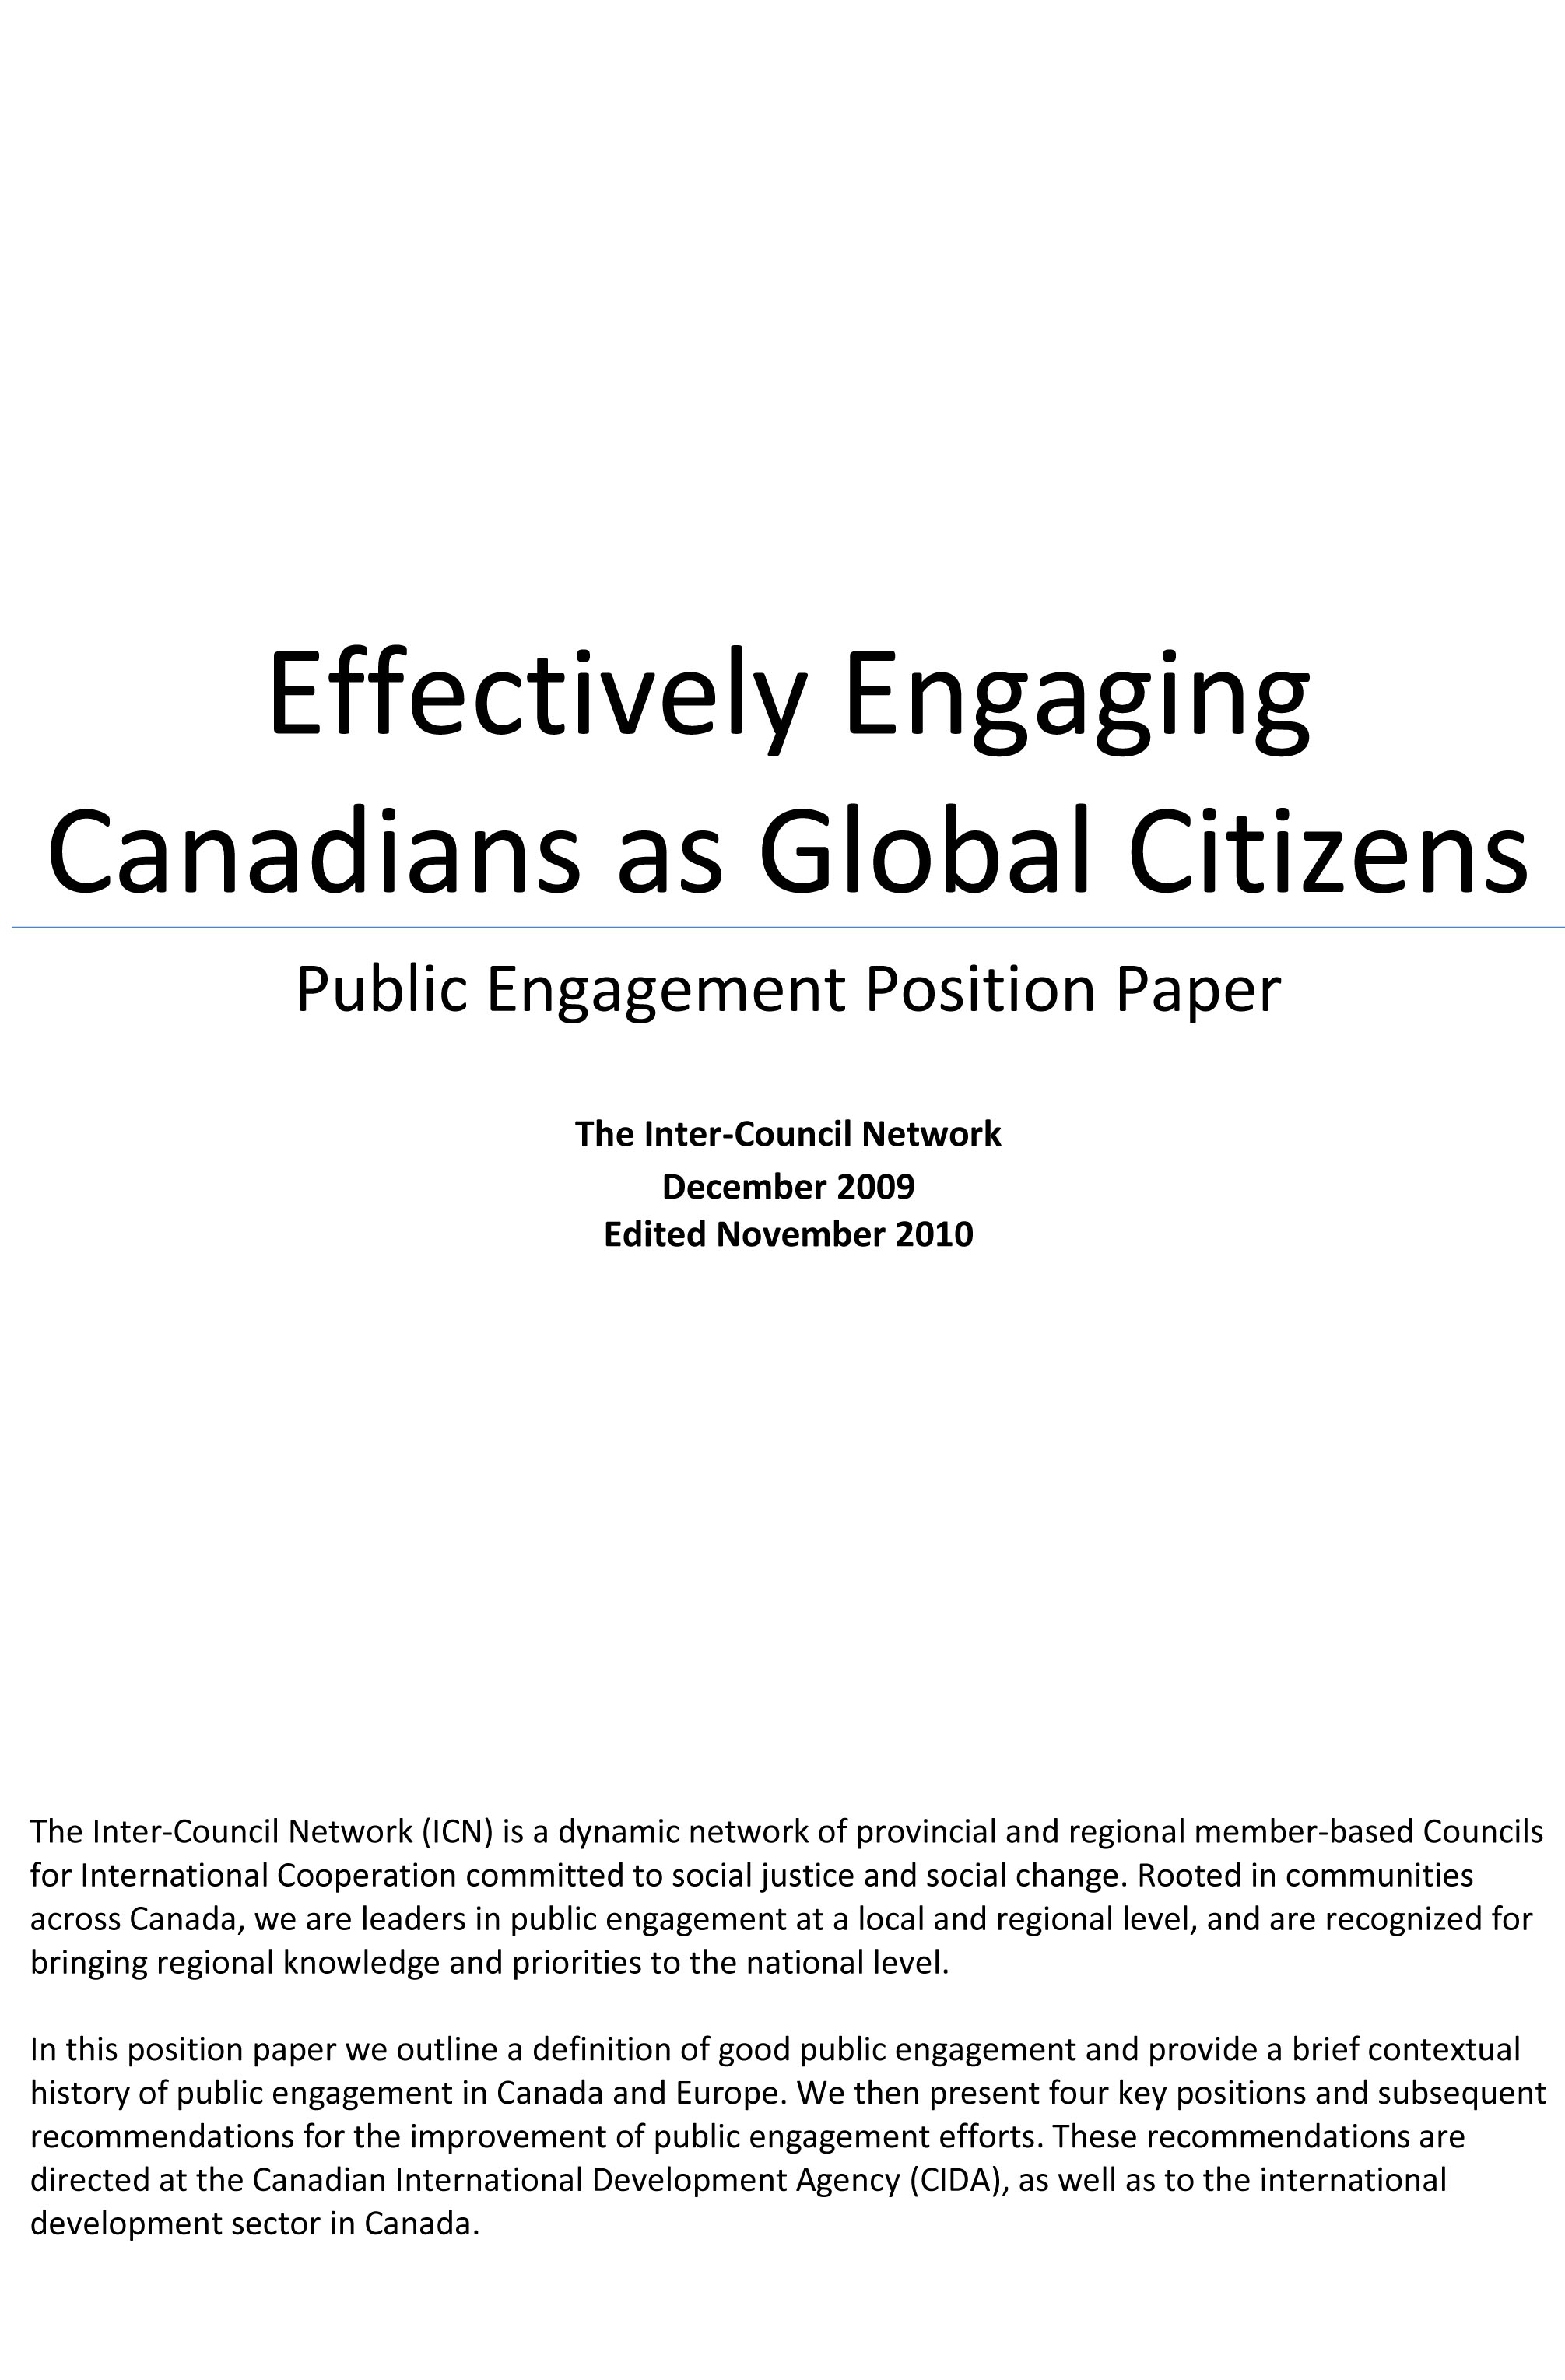 Effectively Engaging Canadians as Global Citizens: Public Engagement Position Paper